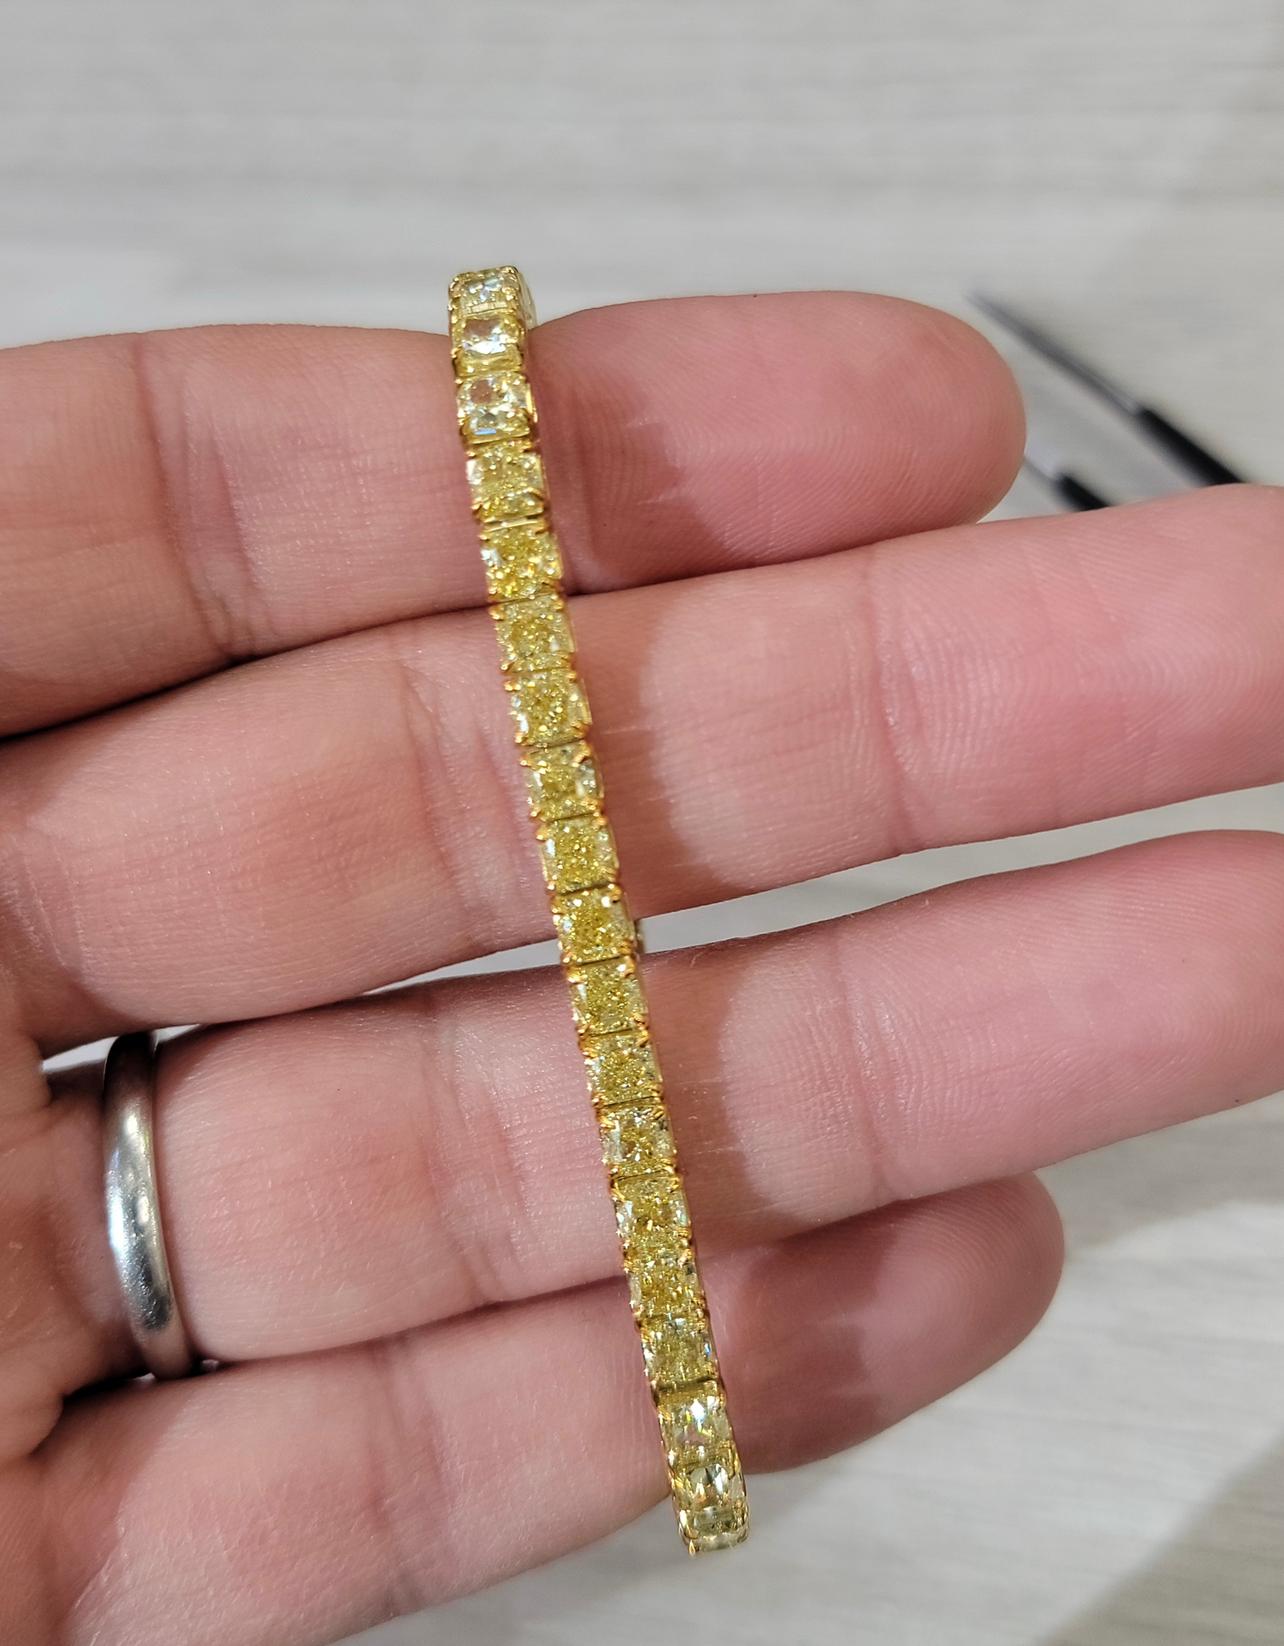 16ct Fancy Intense Yellow Cushion Diamond Tennis Bracelet In New Condition For Sale In New York, NY